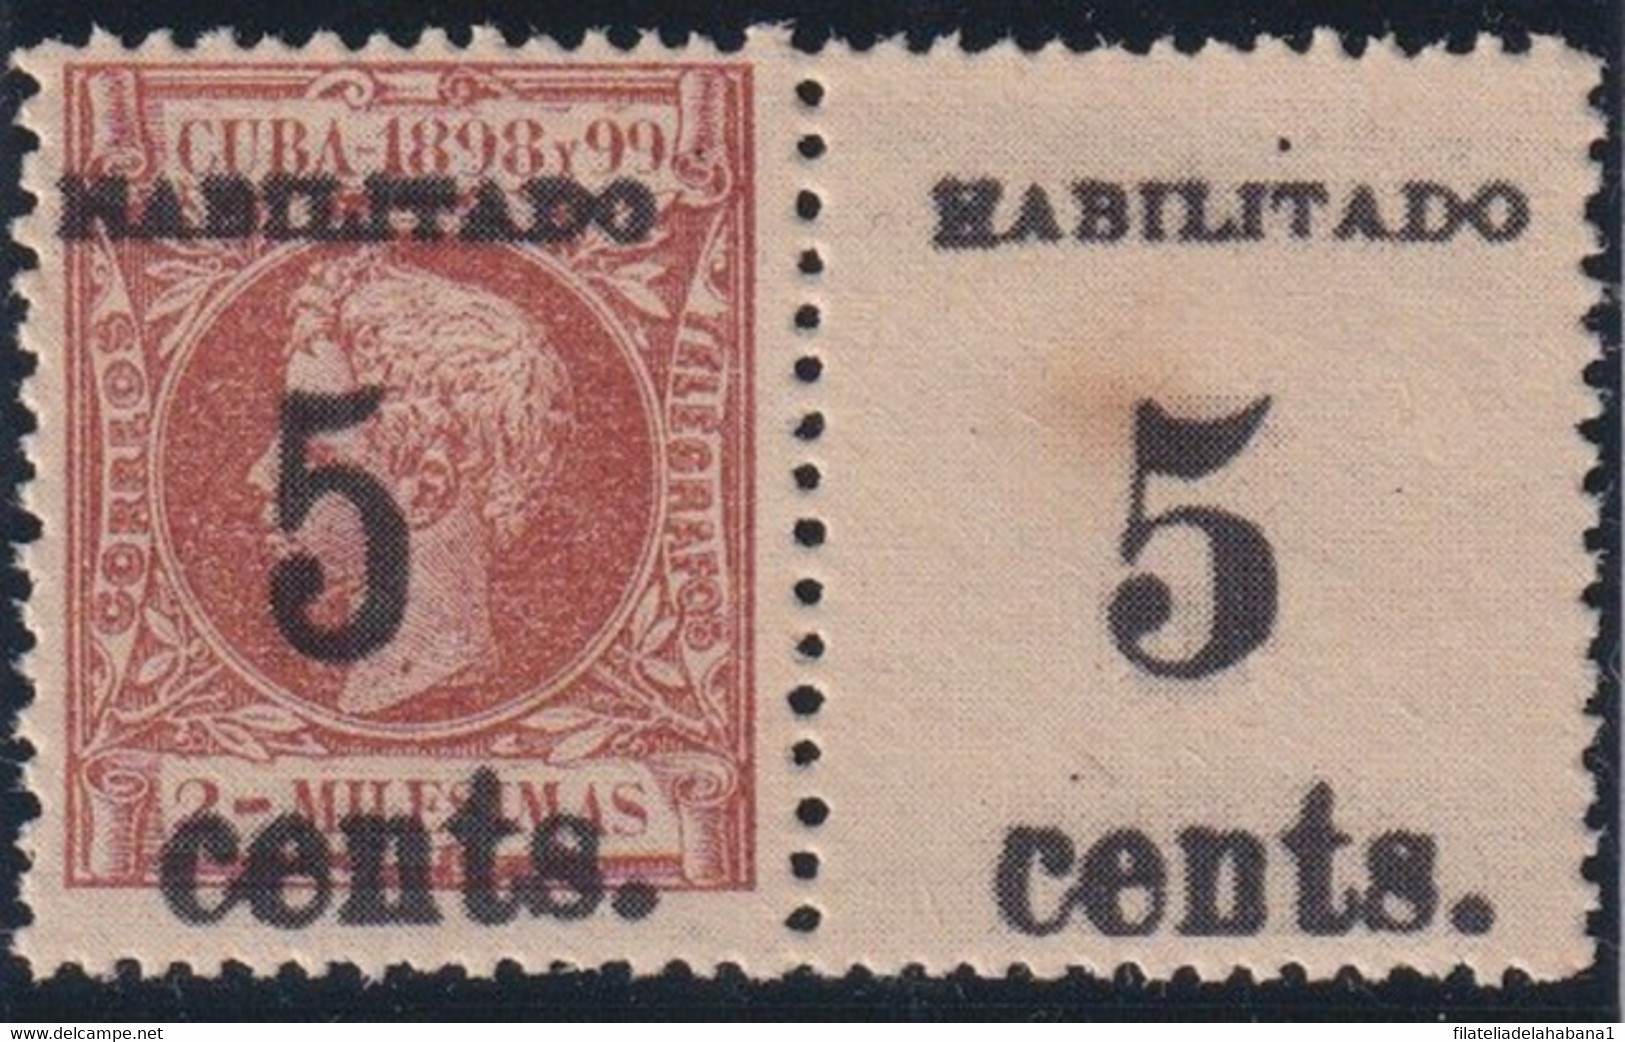 1899-608 CUBA 1899 US OCCUPATION. FORGERY PUERTO PRINCIPE. 2º ISSUE. 5c S. 5 Mls. PAIR NORMAL + SMALL NUMBER. - Unused Stamps